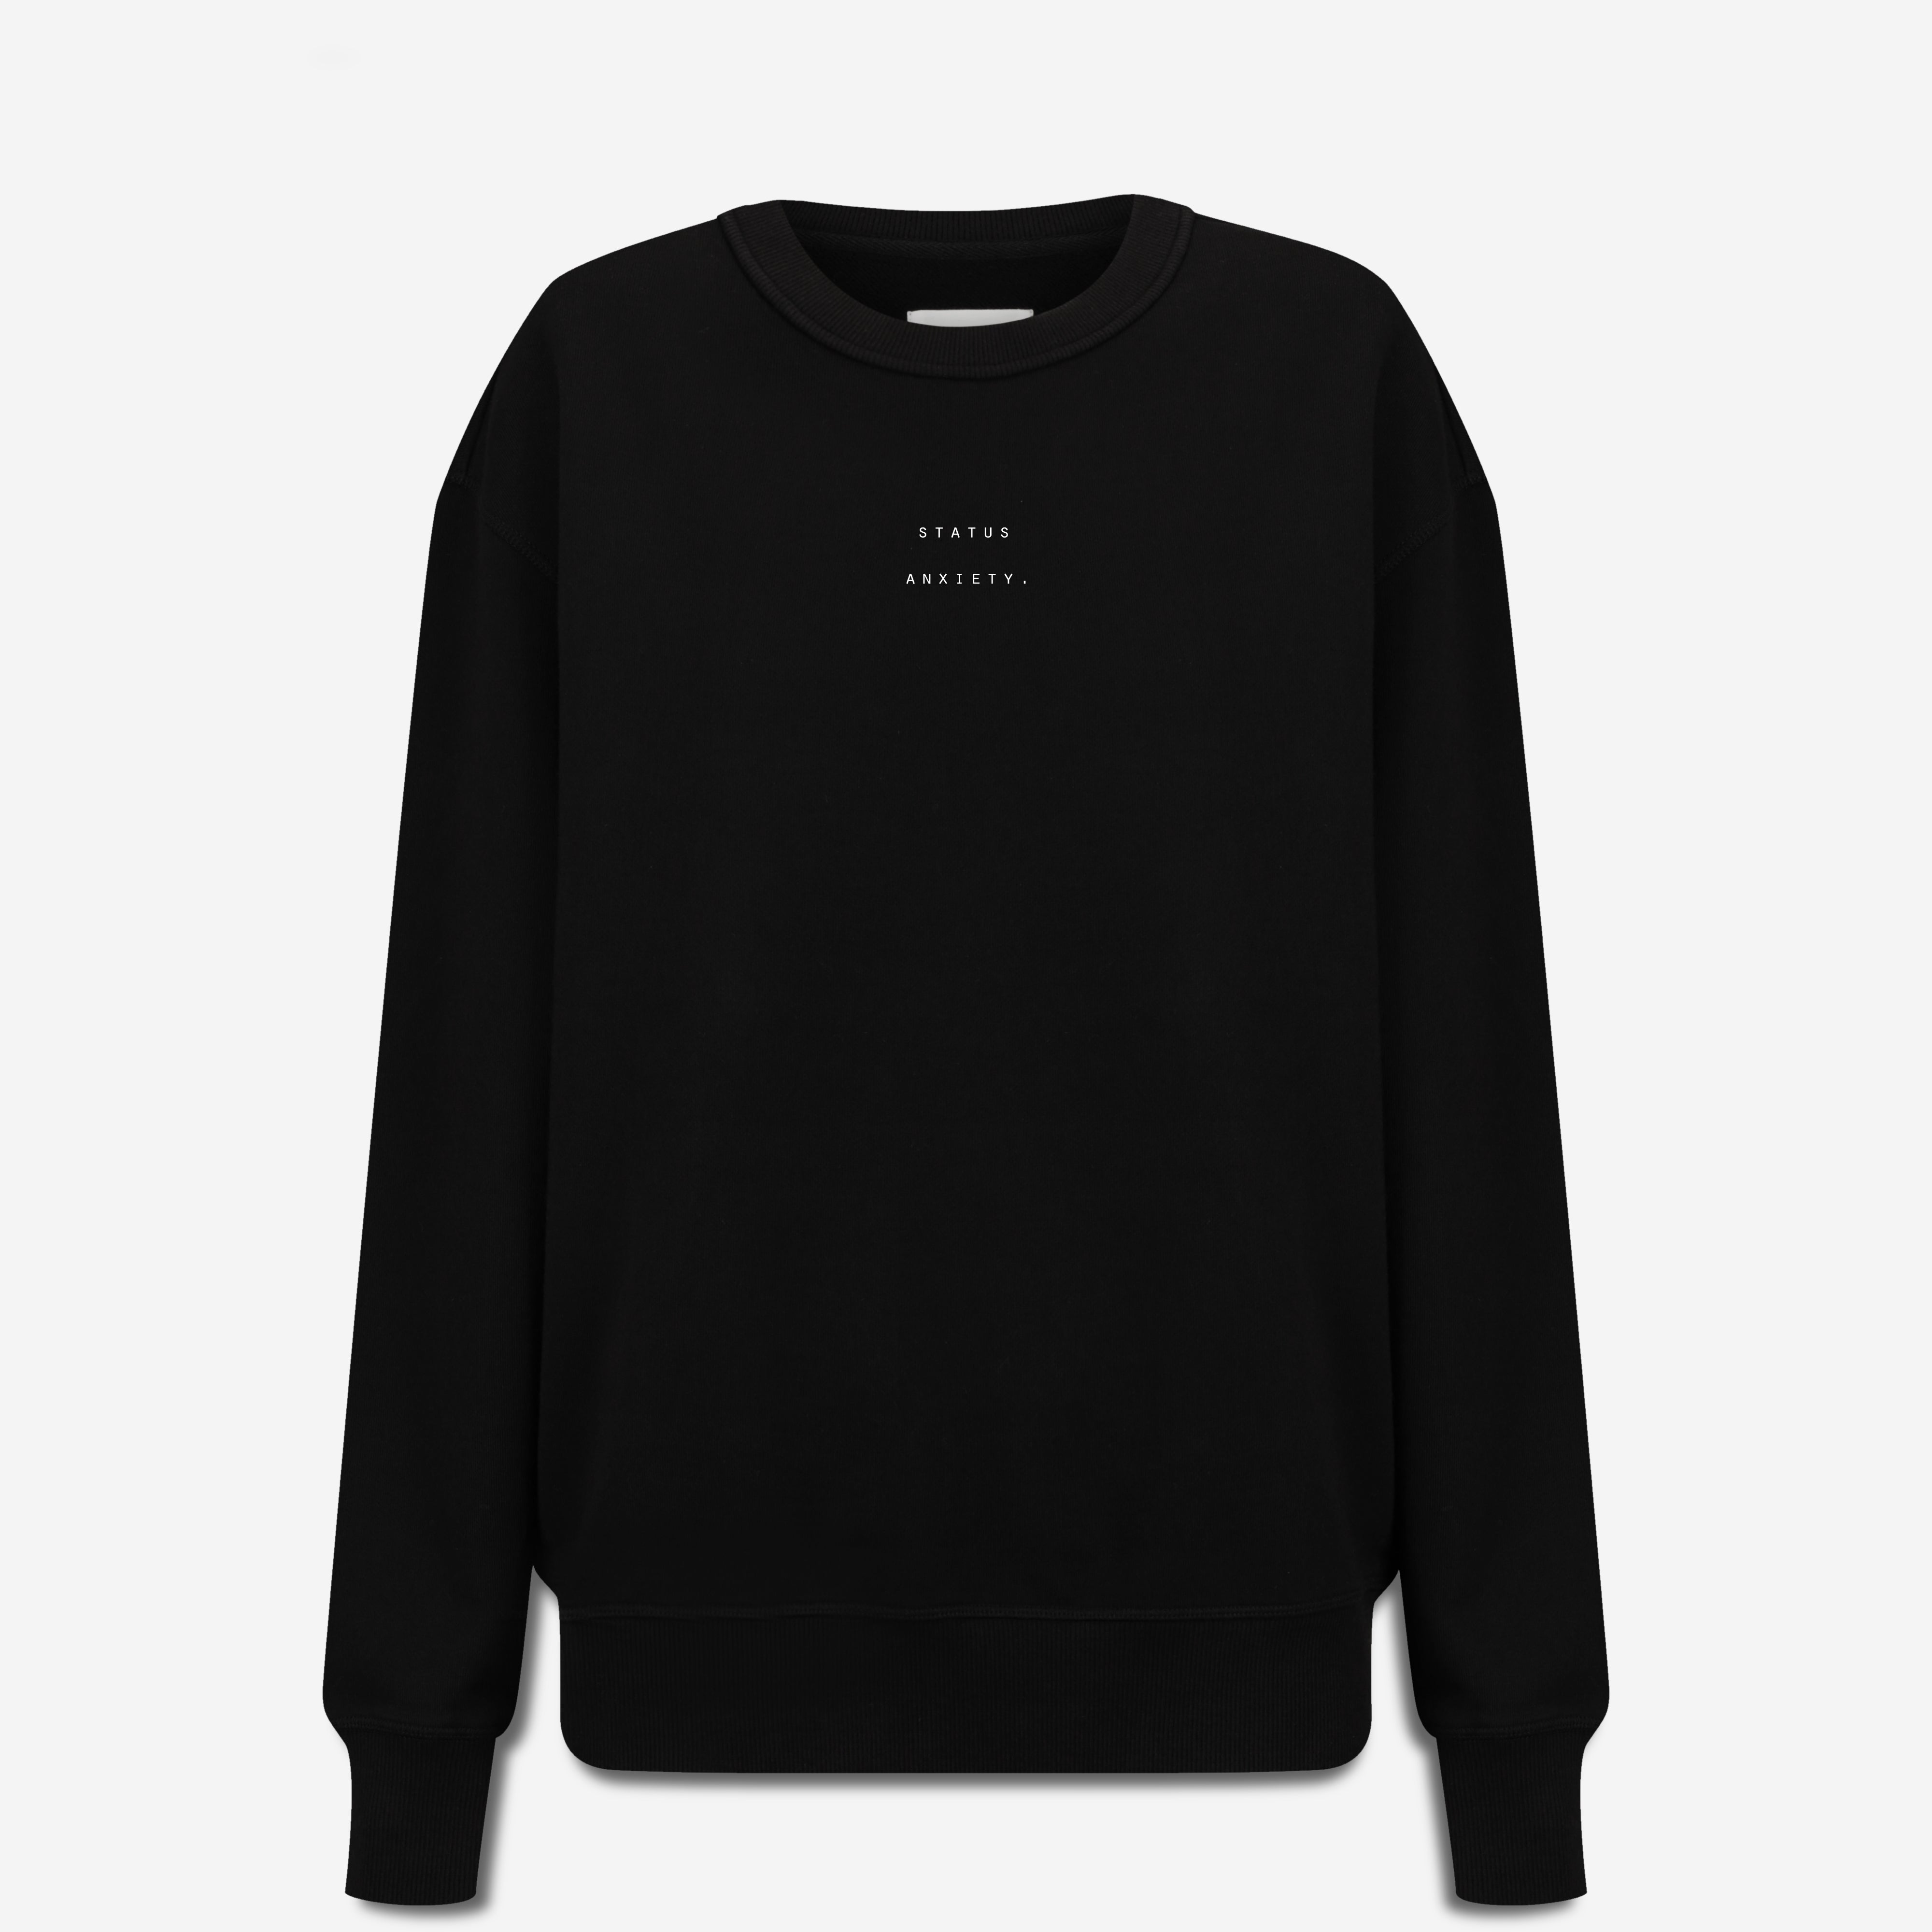 Could Be Nice Logo - Women's Classic Crew / Soft Black